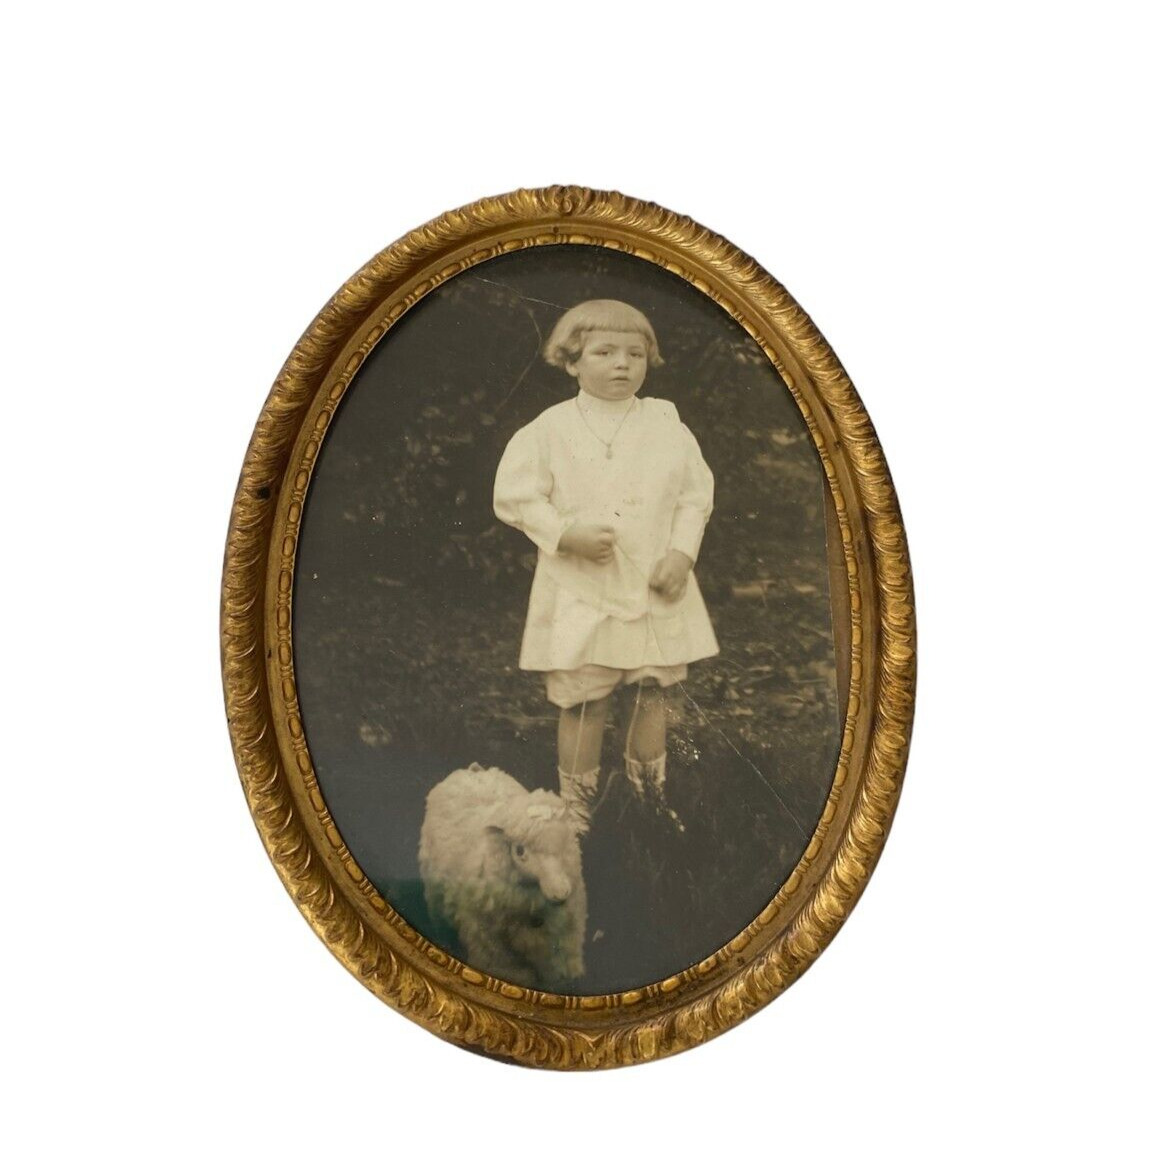 Antique Framed Picture/Photo of a Boy 1890-1900s